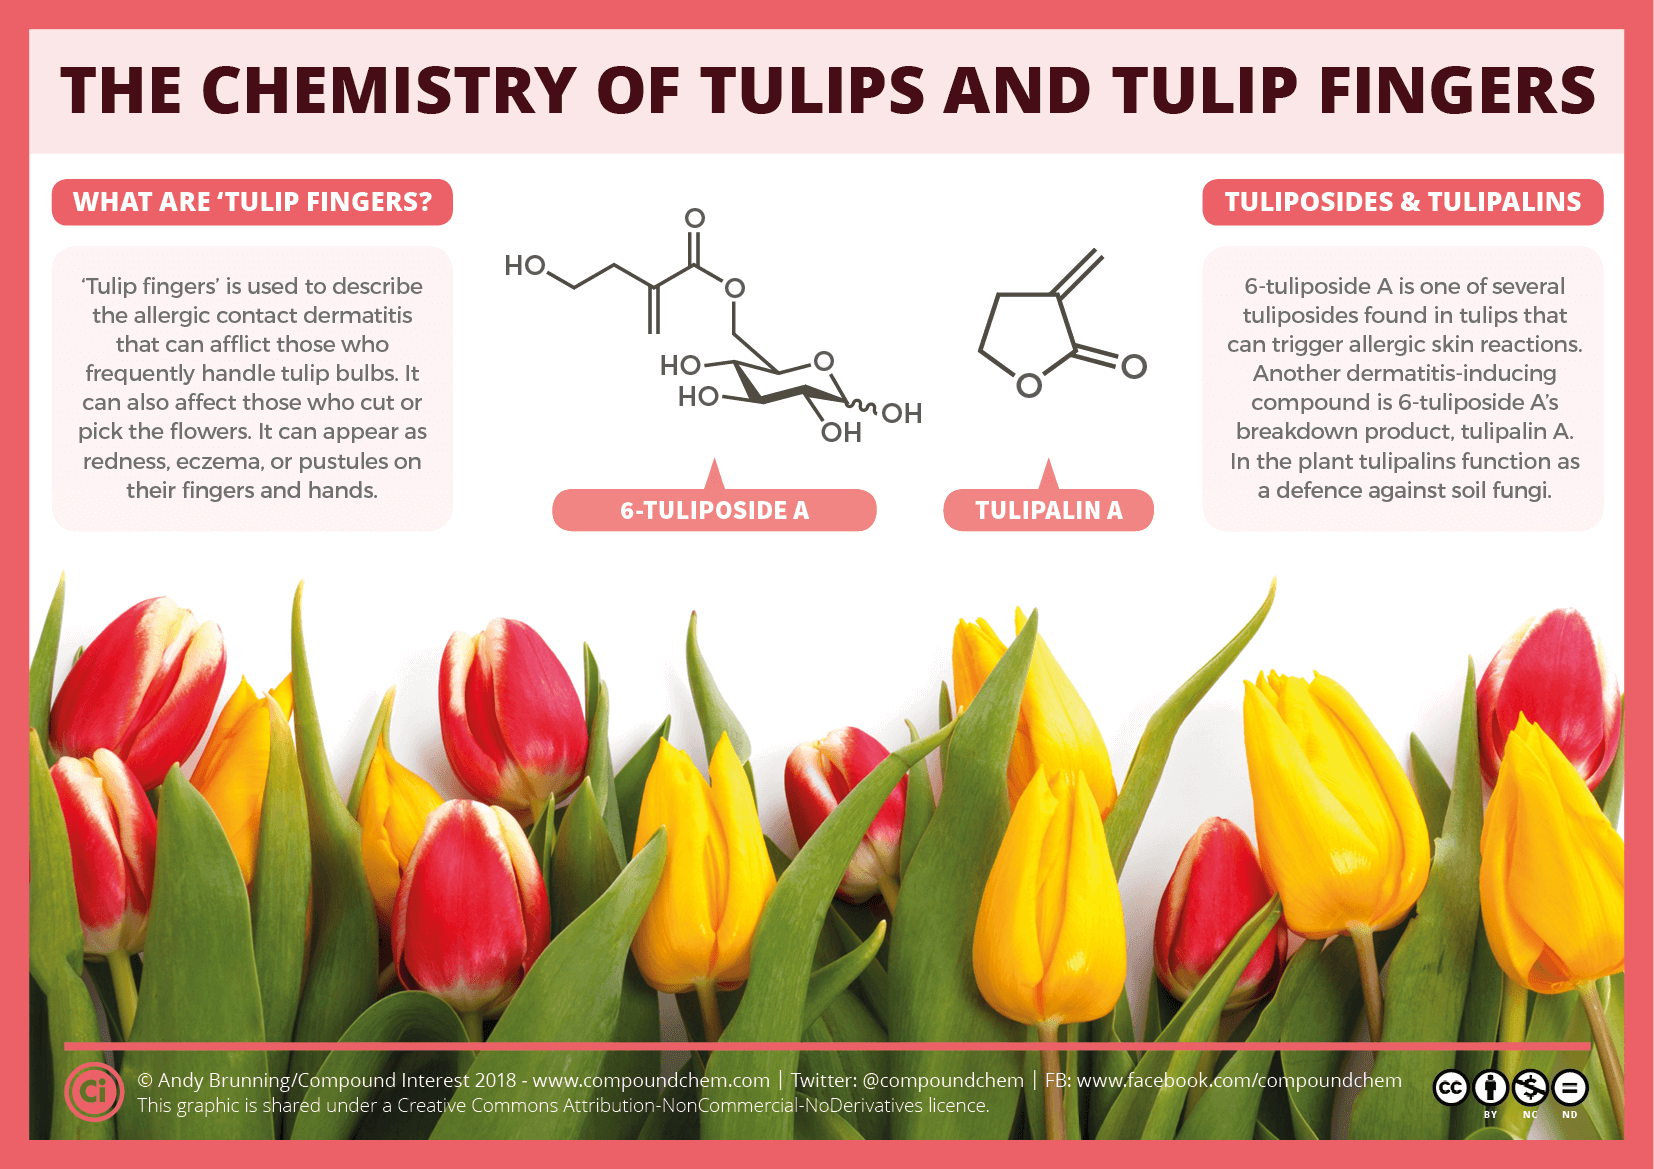 Compound Interest - The chemistry of tulips and tulip fingers